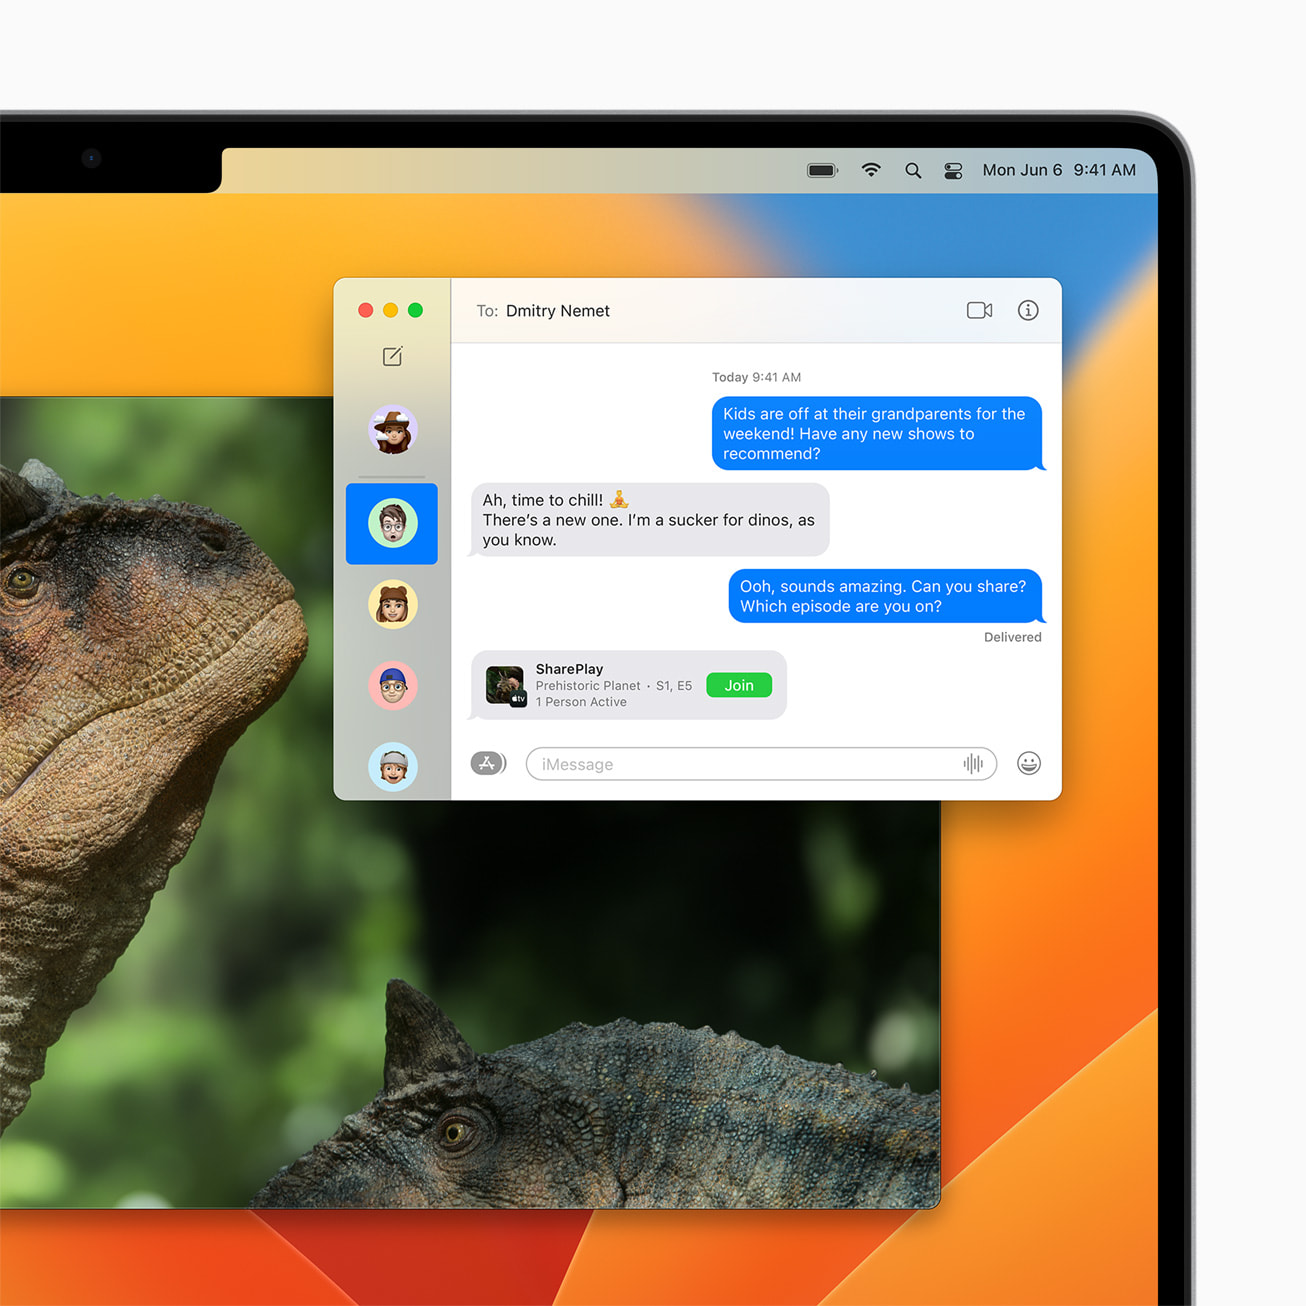 Image of the Messages app on macOS Ventura